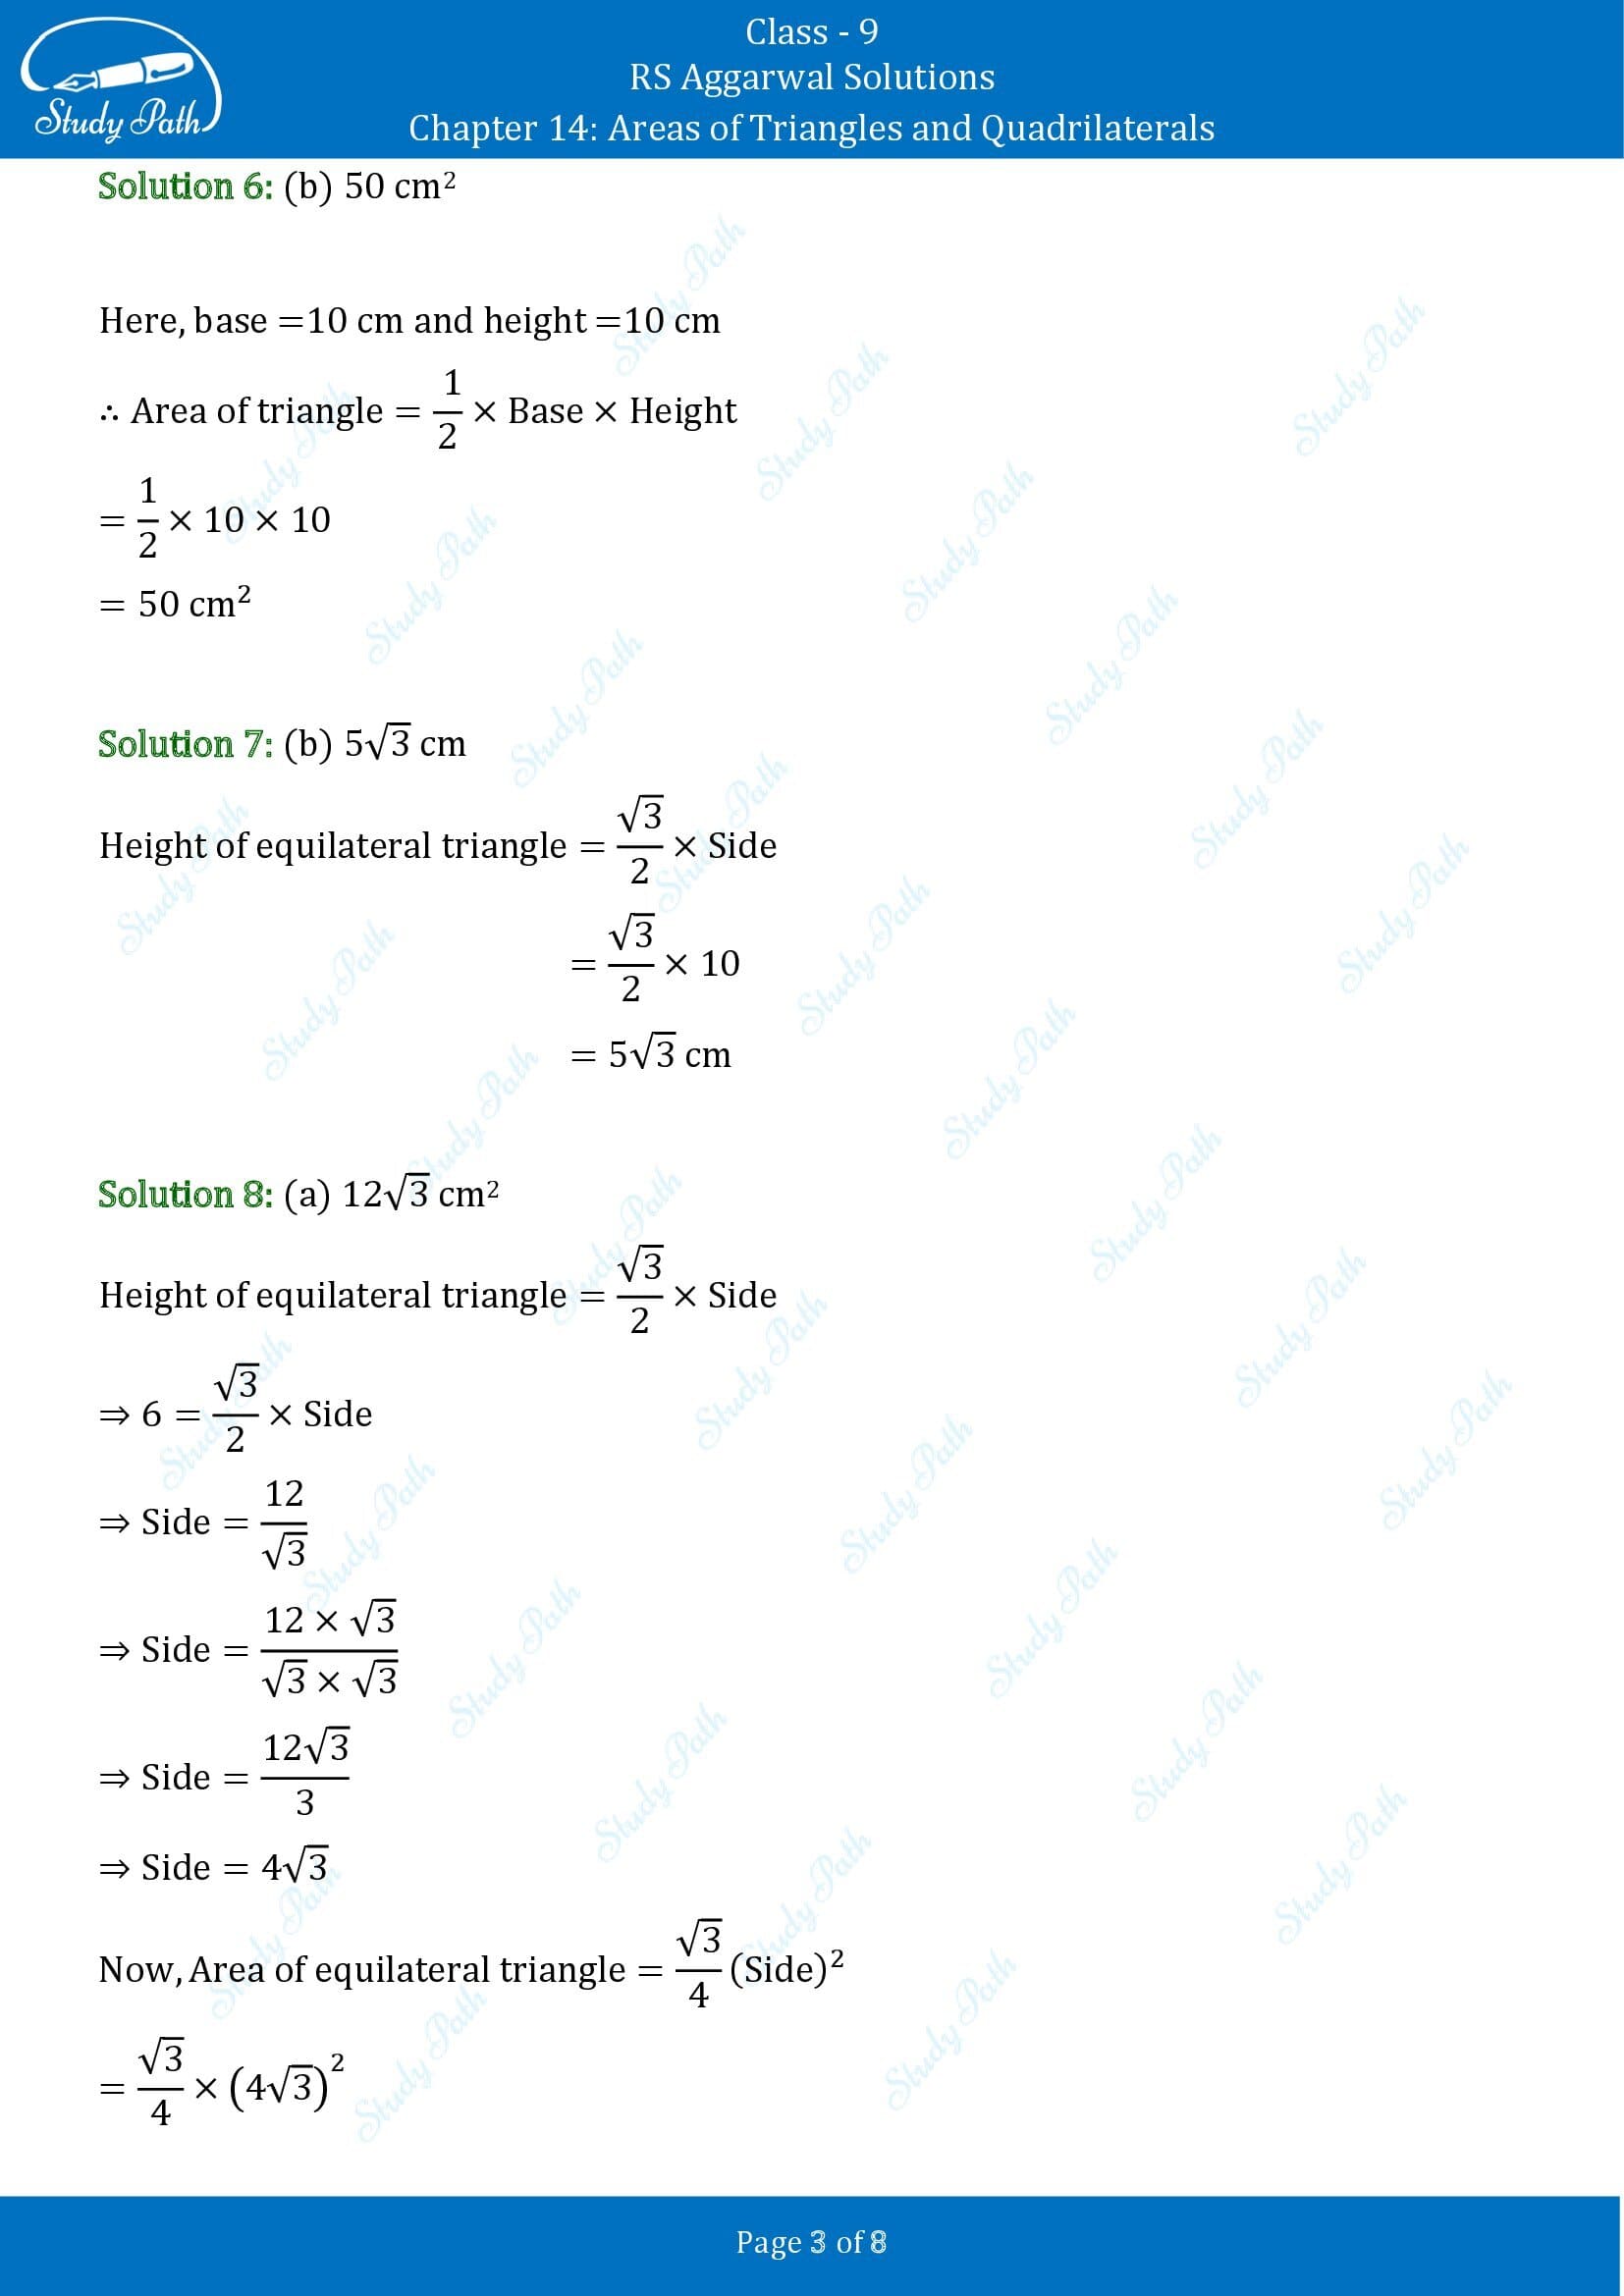 RS Aggarwal Solutions Class 9 Chapter 14 Areas of Triangles and Quadrilaterals Multiple Choice Questions MCQs 00003